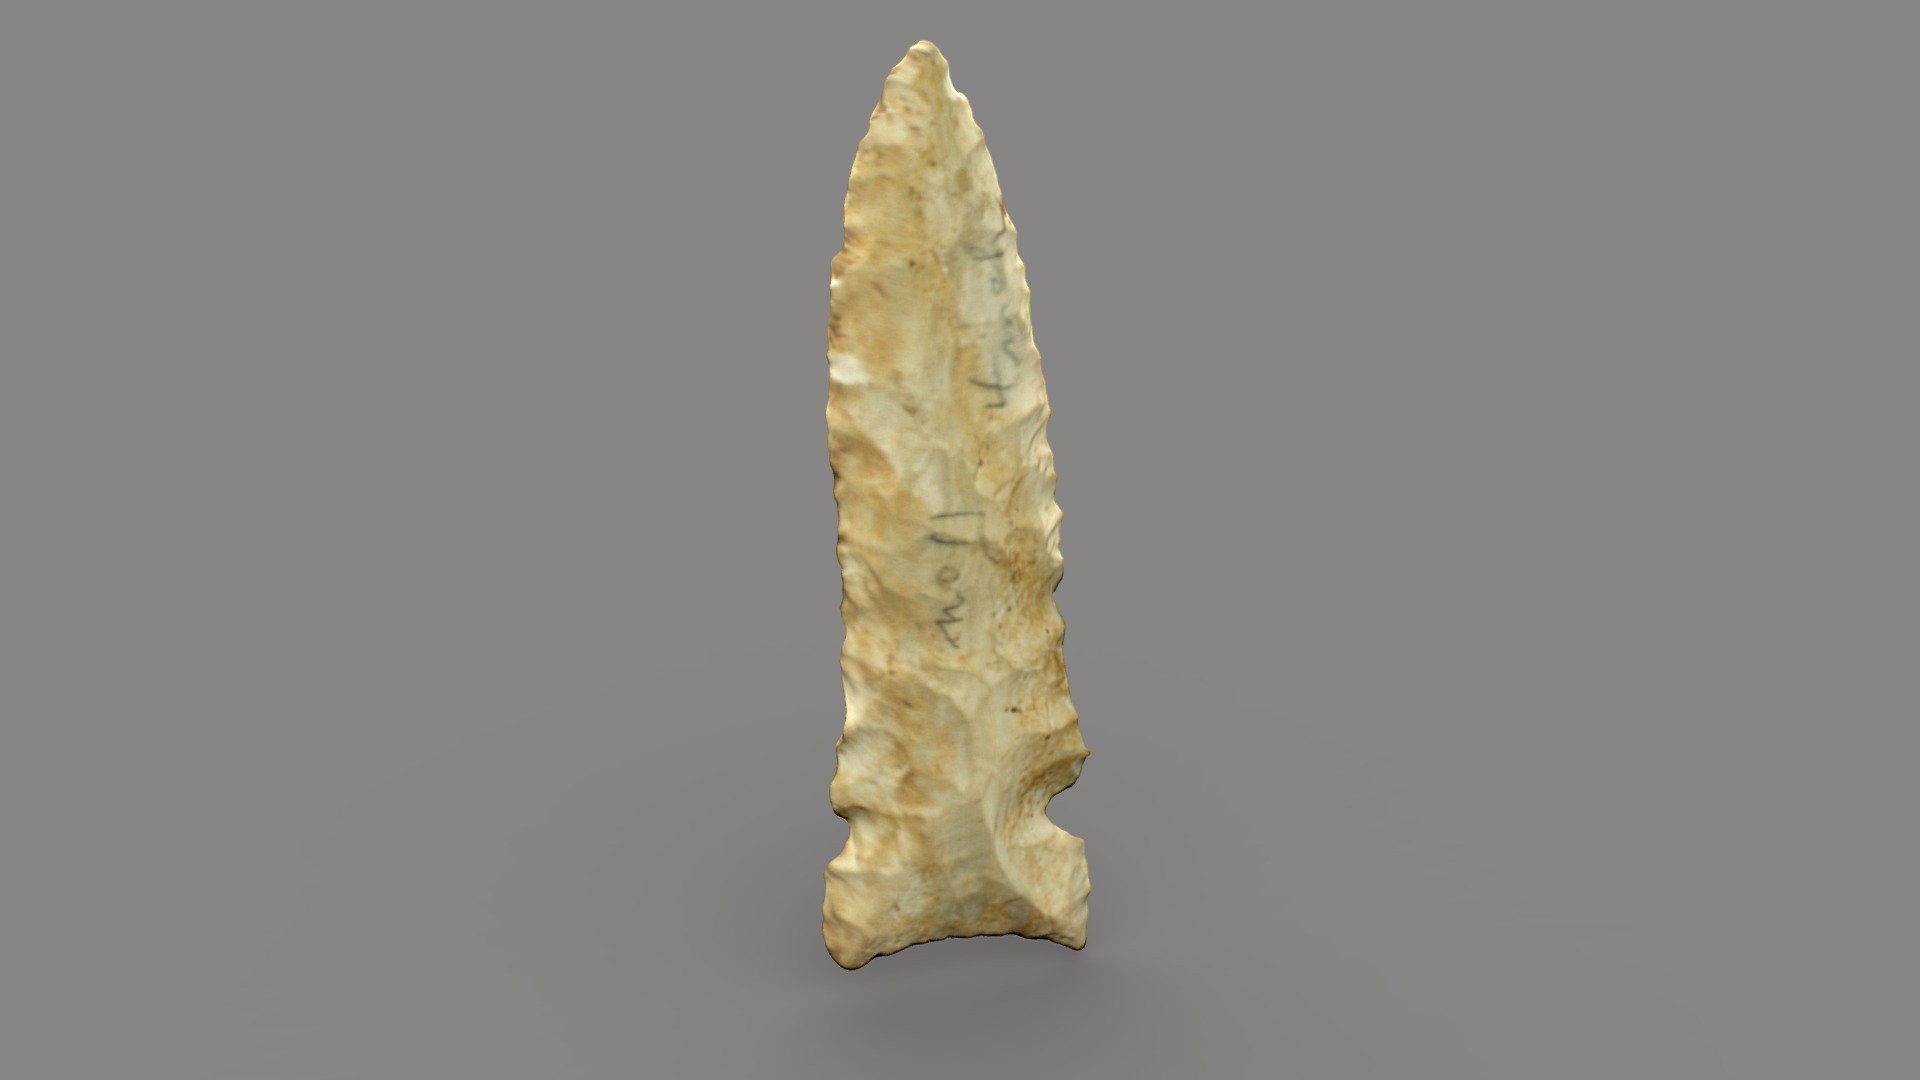 Graham Cave Projectile Point